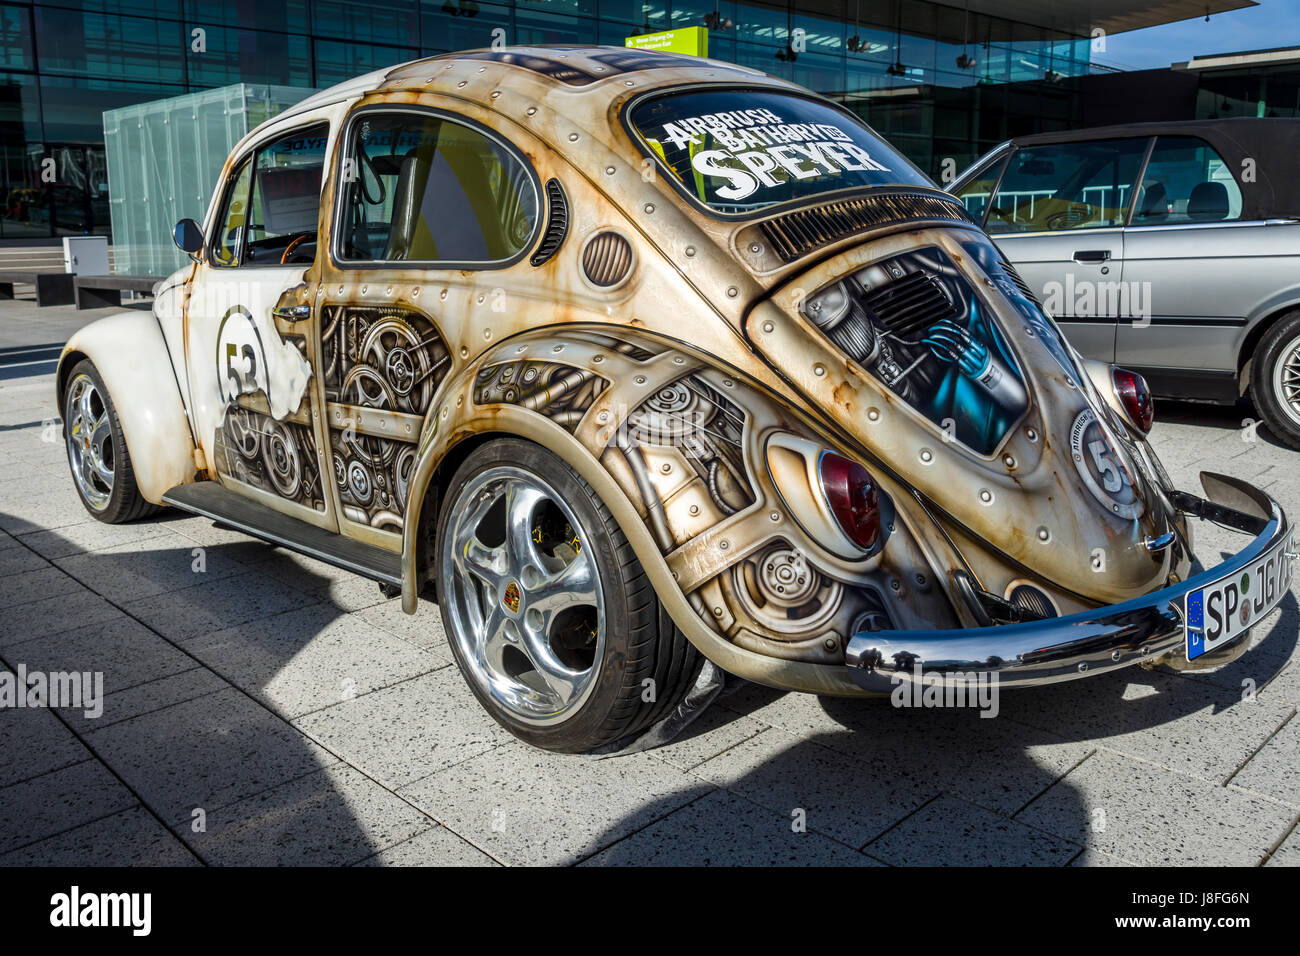 Compact car Volkswagen Beetle in unusual body painting (aerography). Rear view. Europe's greatest classic car exhibition 'RETRO CLASSICS' Stock Photo